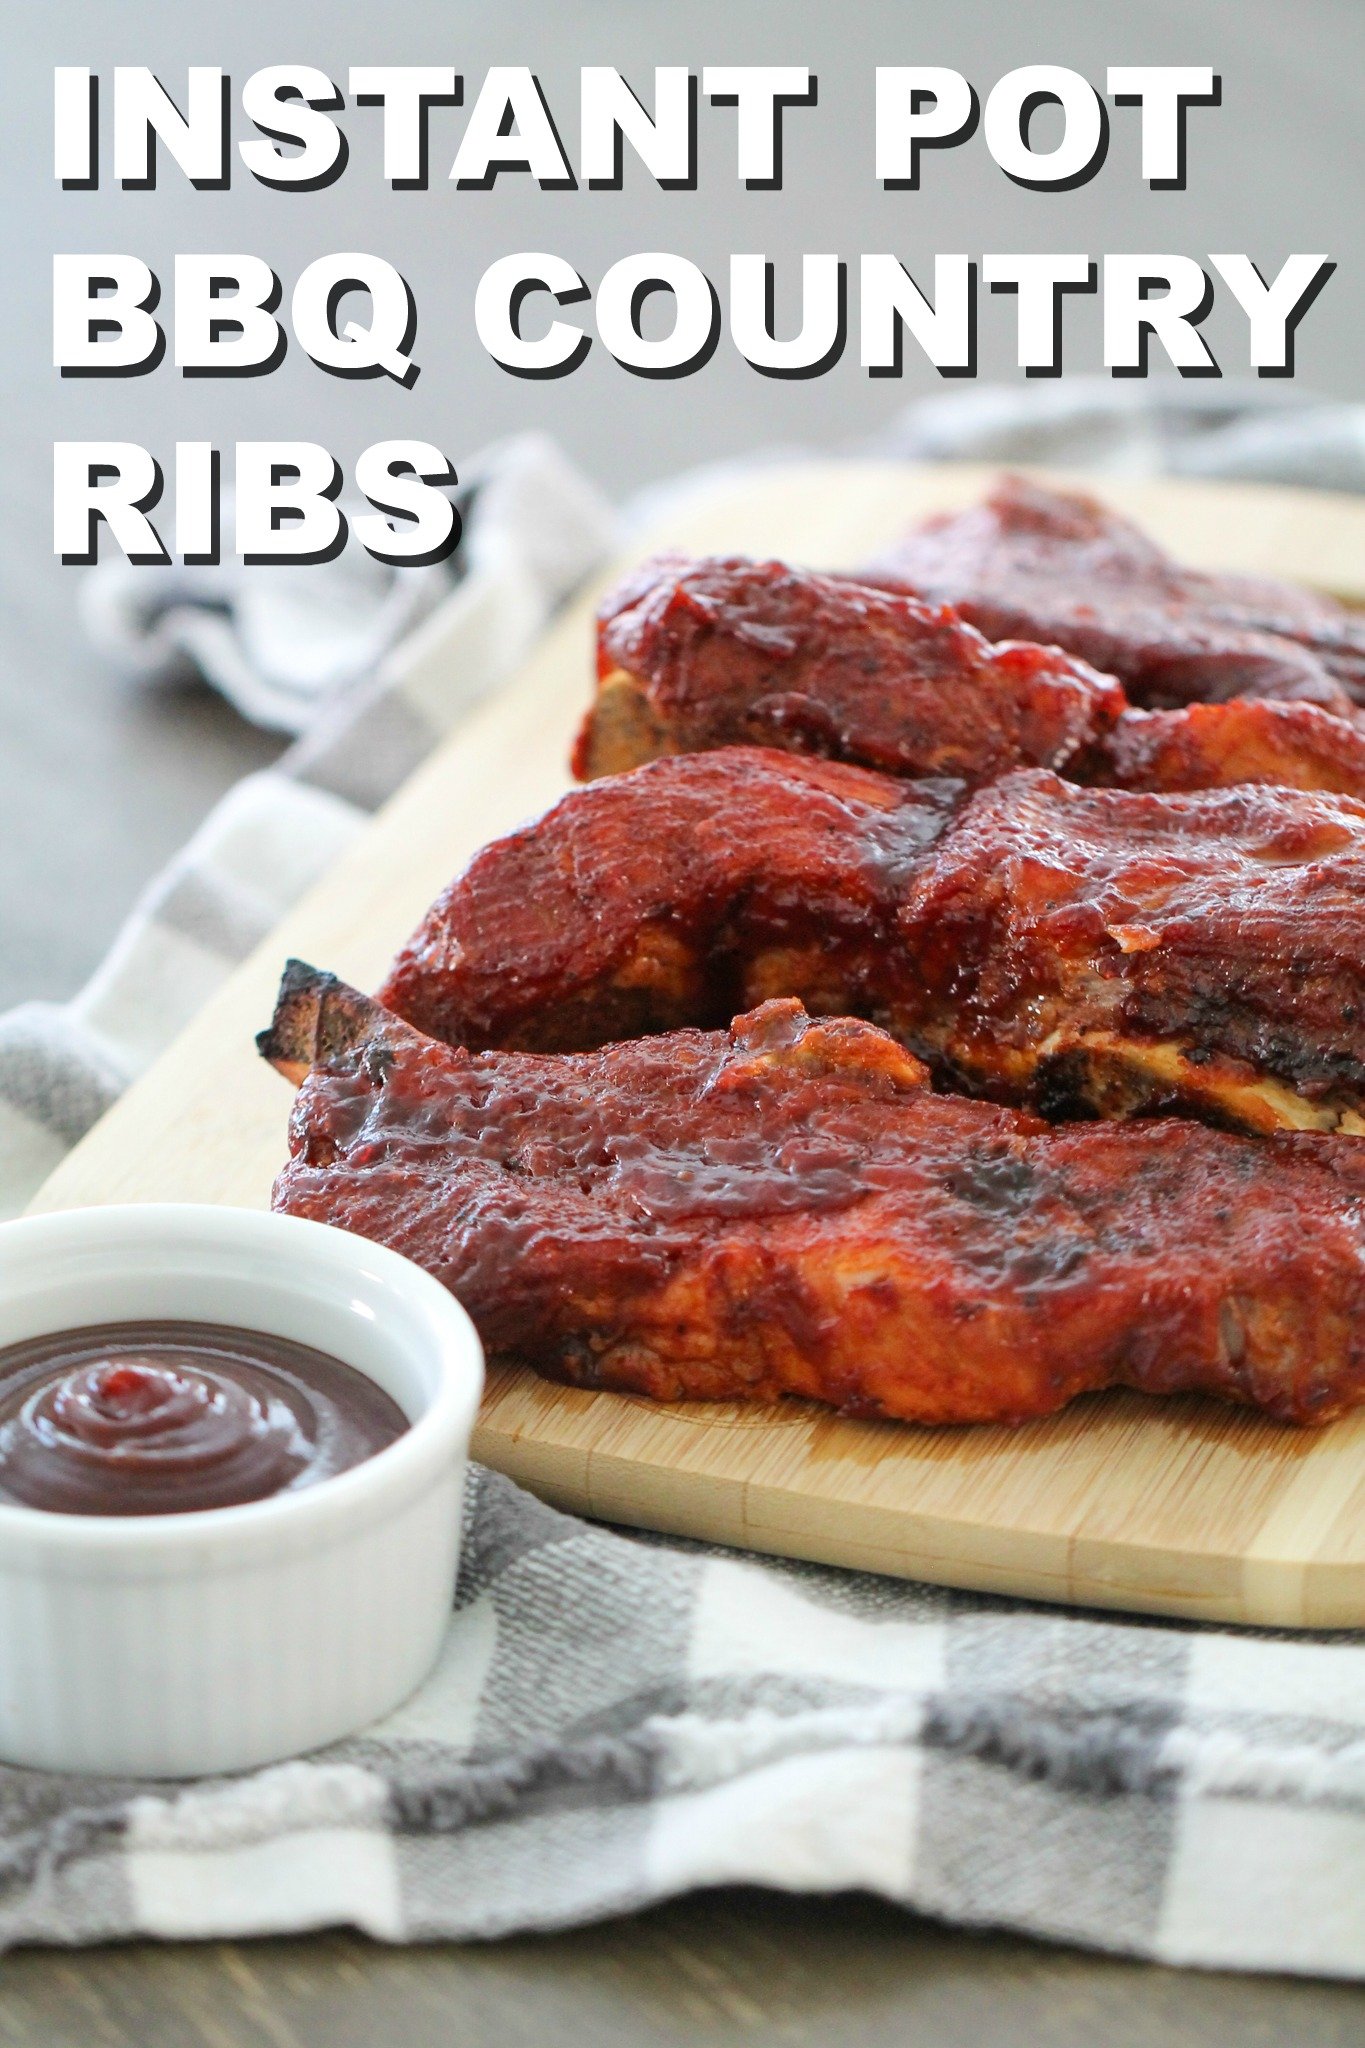 Instant Pot BBQ Country Ribs on a cutting board with a side of BBQ Sauce